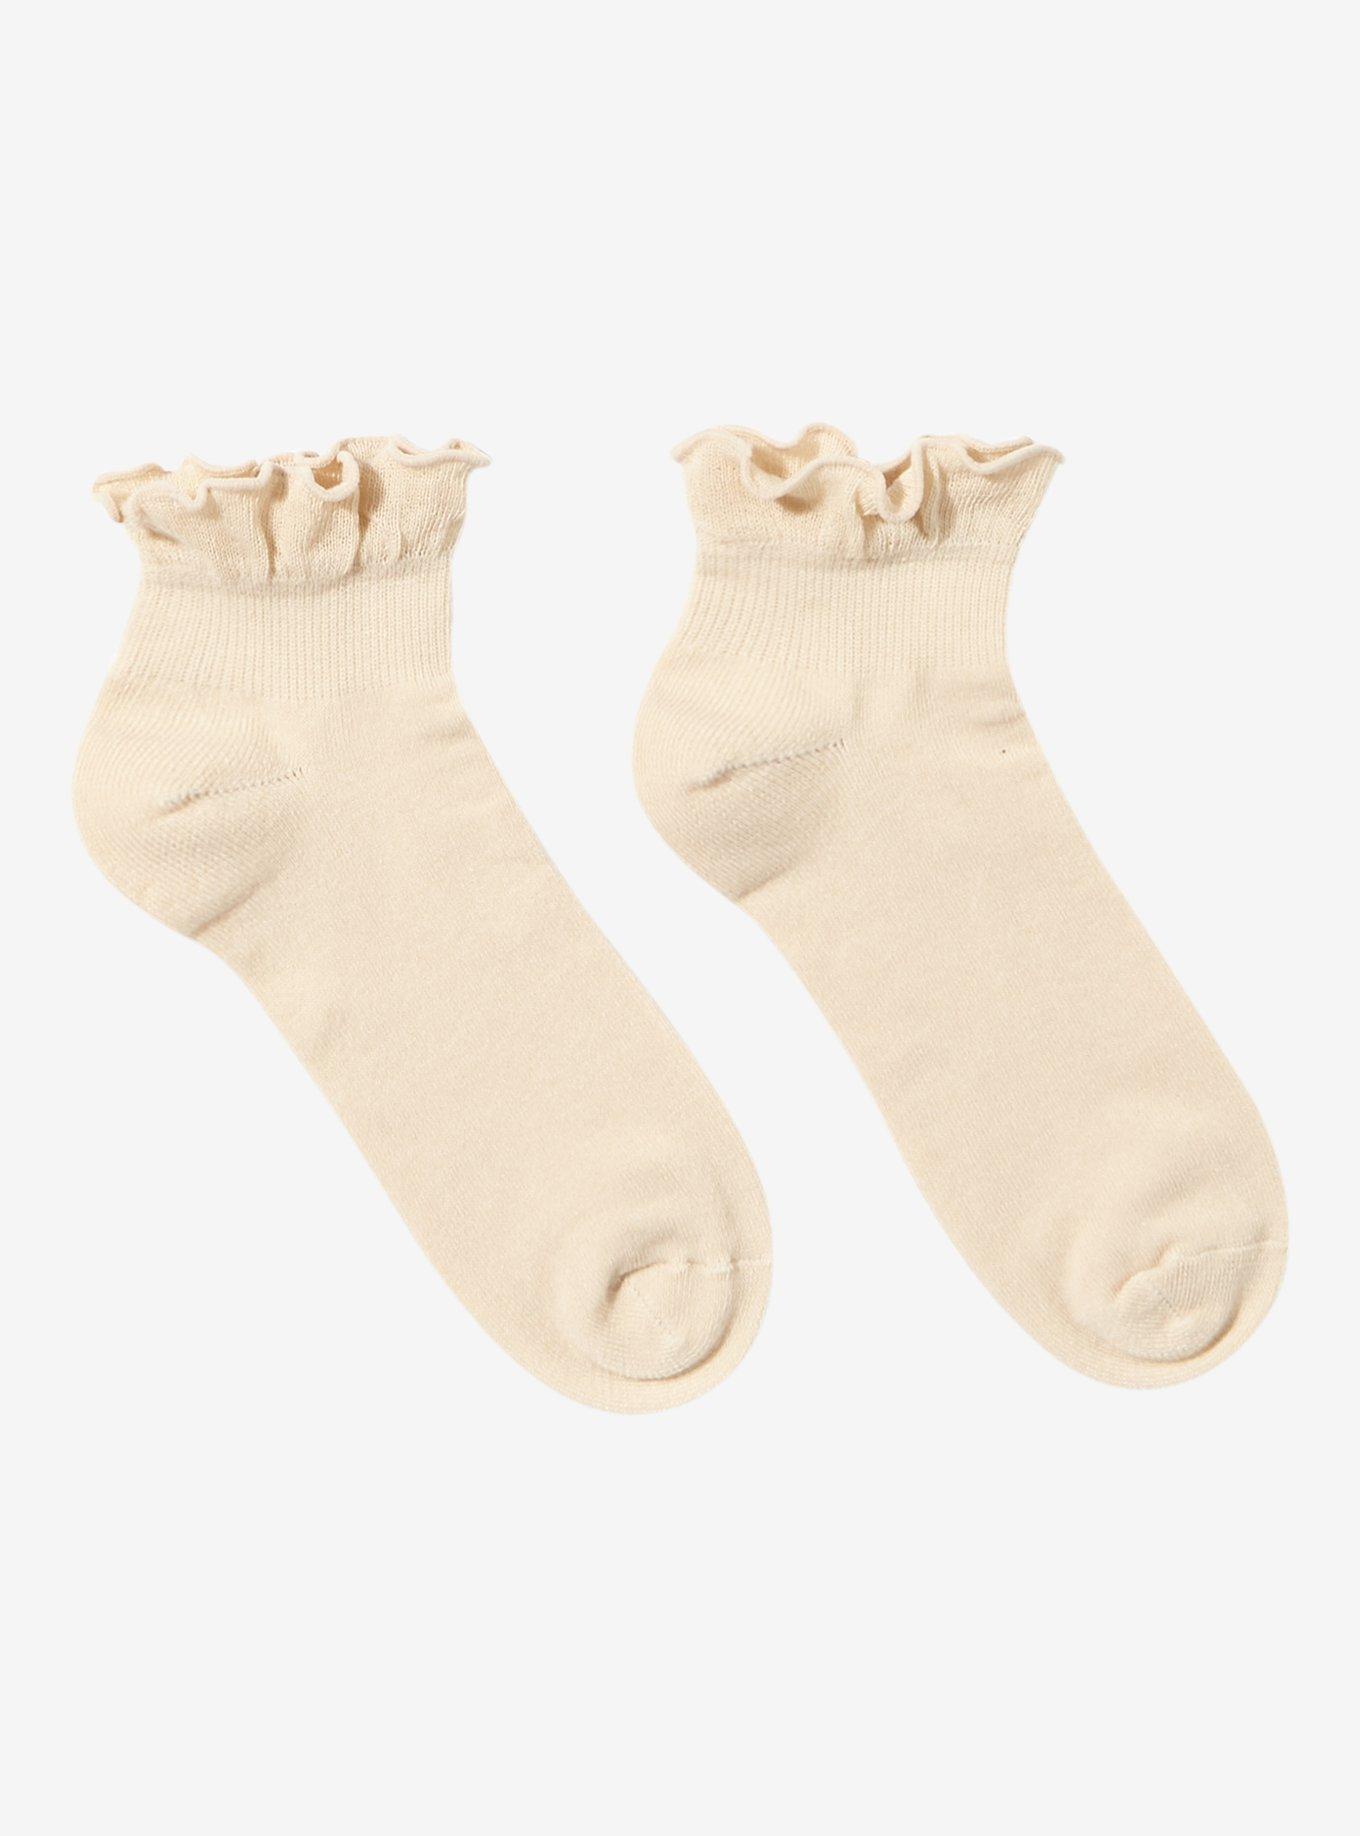 Taupe Ruffle Ankle Socks, , hi-res